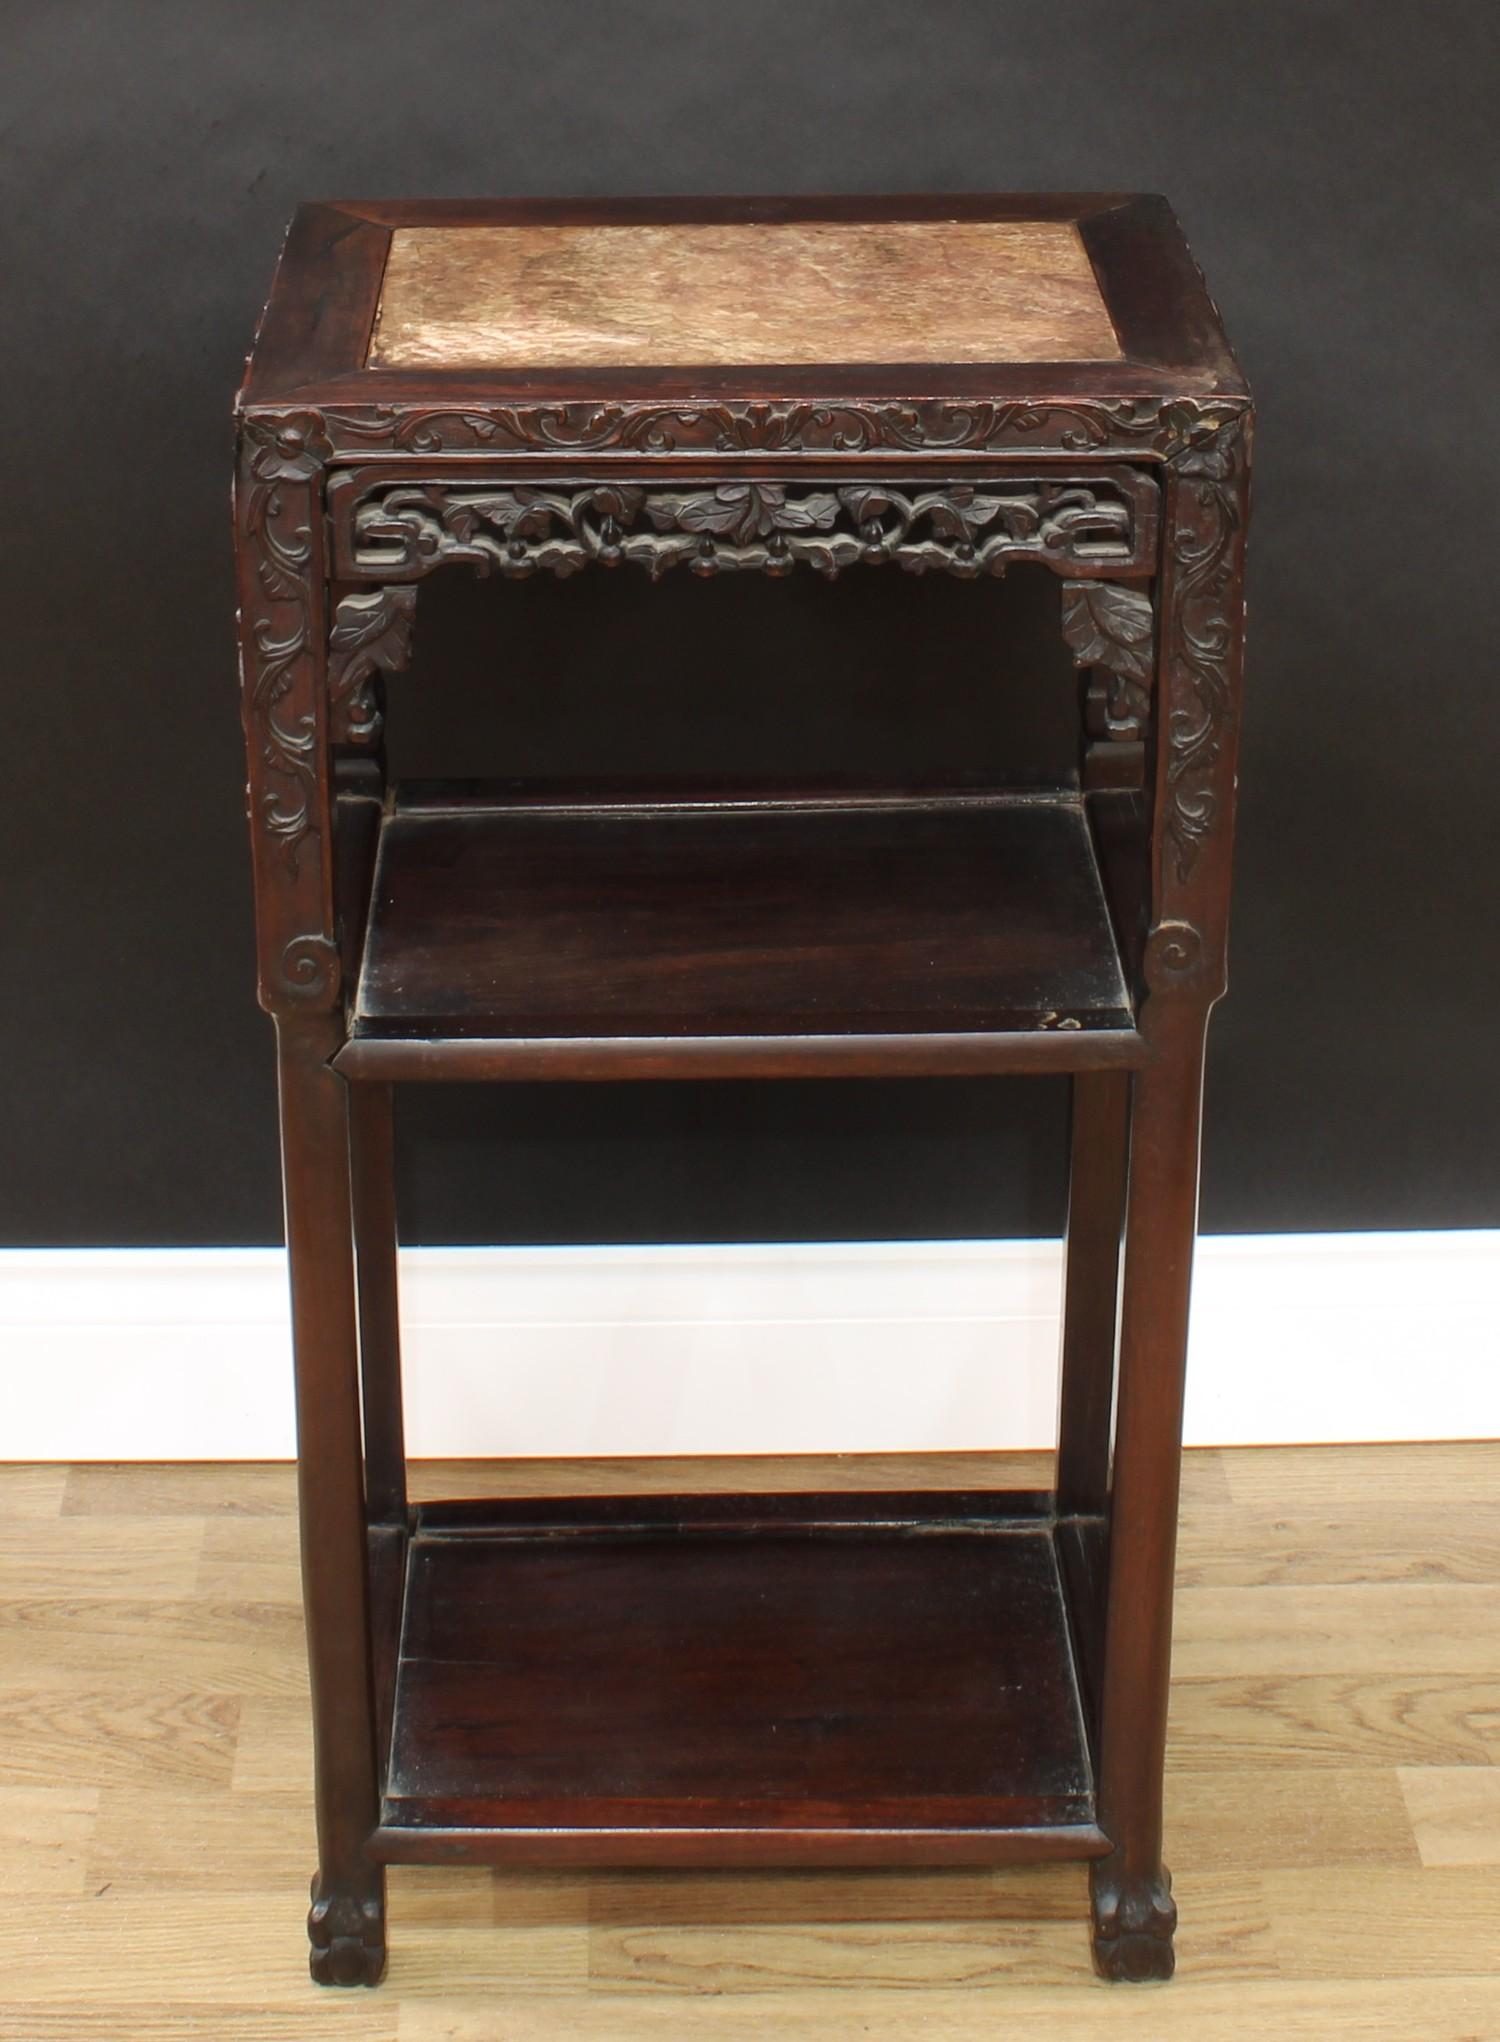 A 19th century Chinese hardwood rectangular vase stand, the top with inset soapstone panel above two